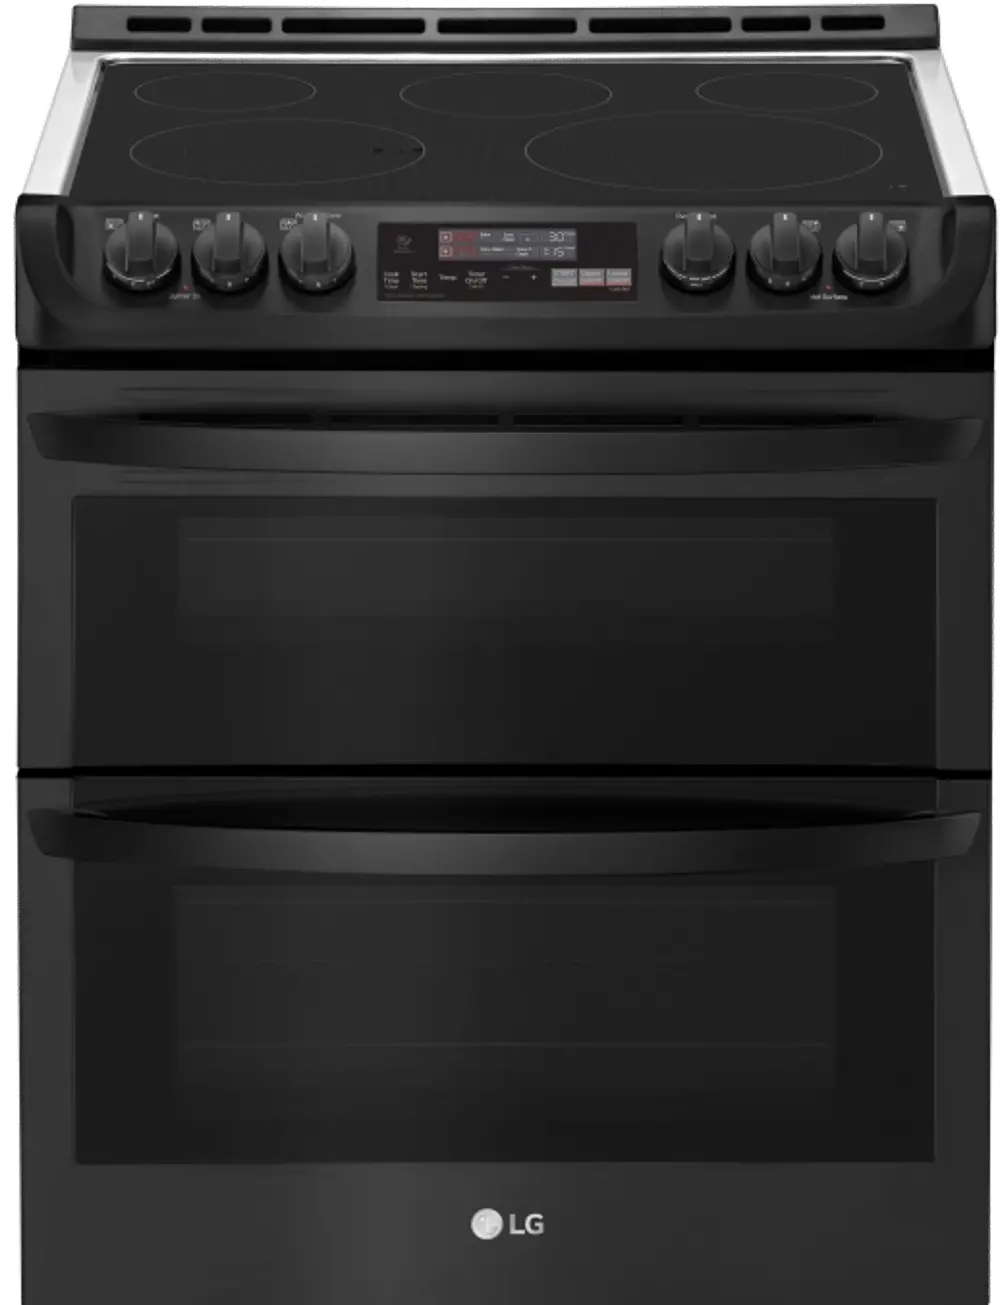 LTE4815BM LG 7.3 cu. ft. Smart WiFi Enabled Electric Double Oven Slide-In Range with ProBake Convection and EasyClean - Matte Black Stainless Steel-1